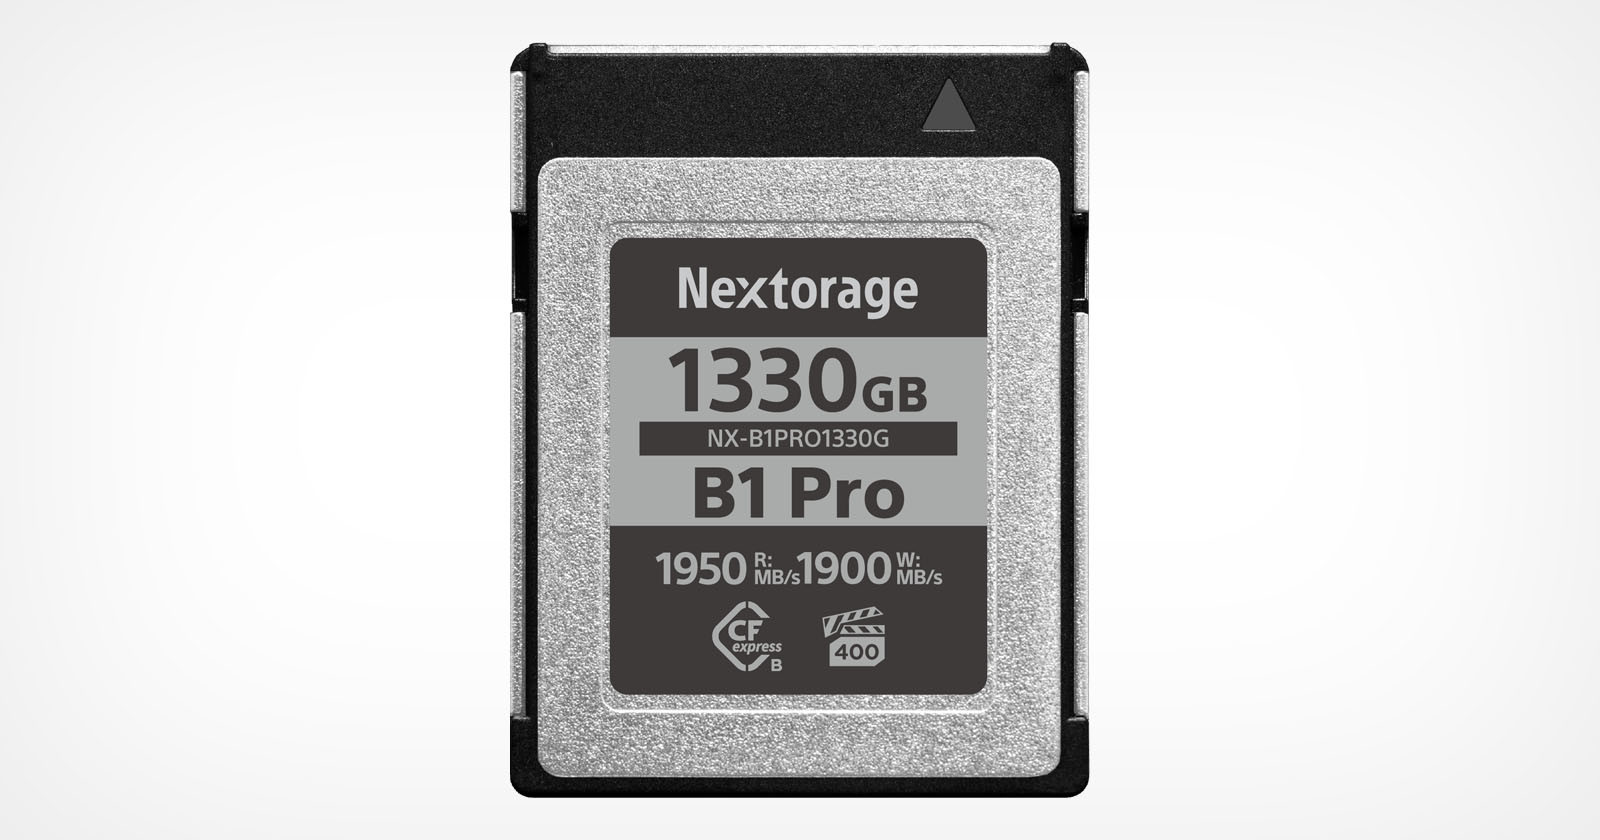  nextorage says has made fastest cfexpress cards 